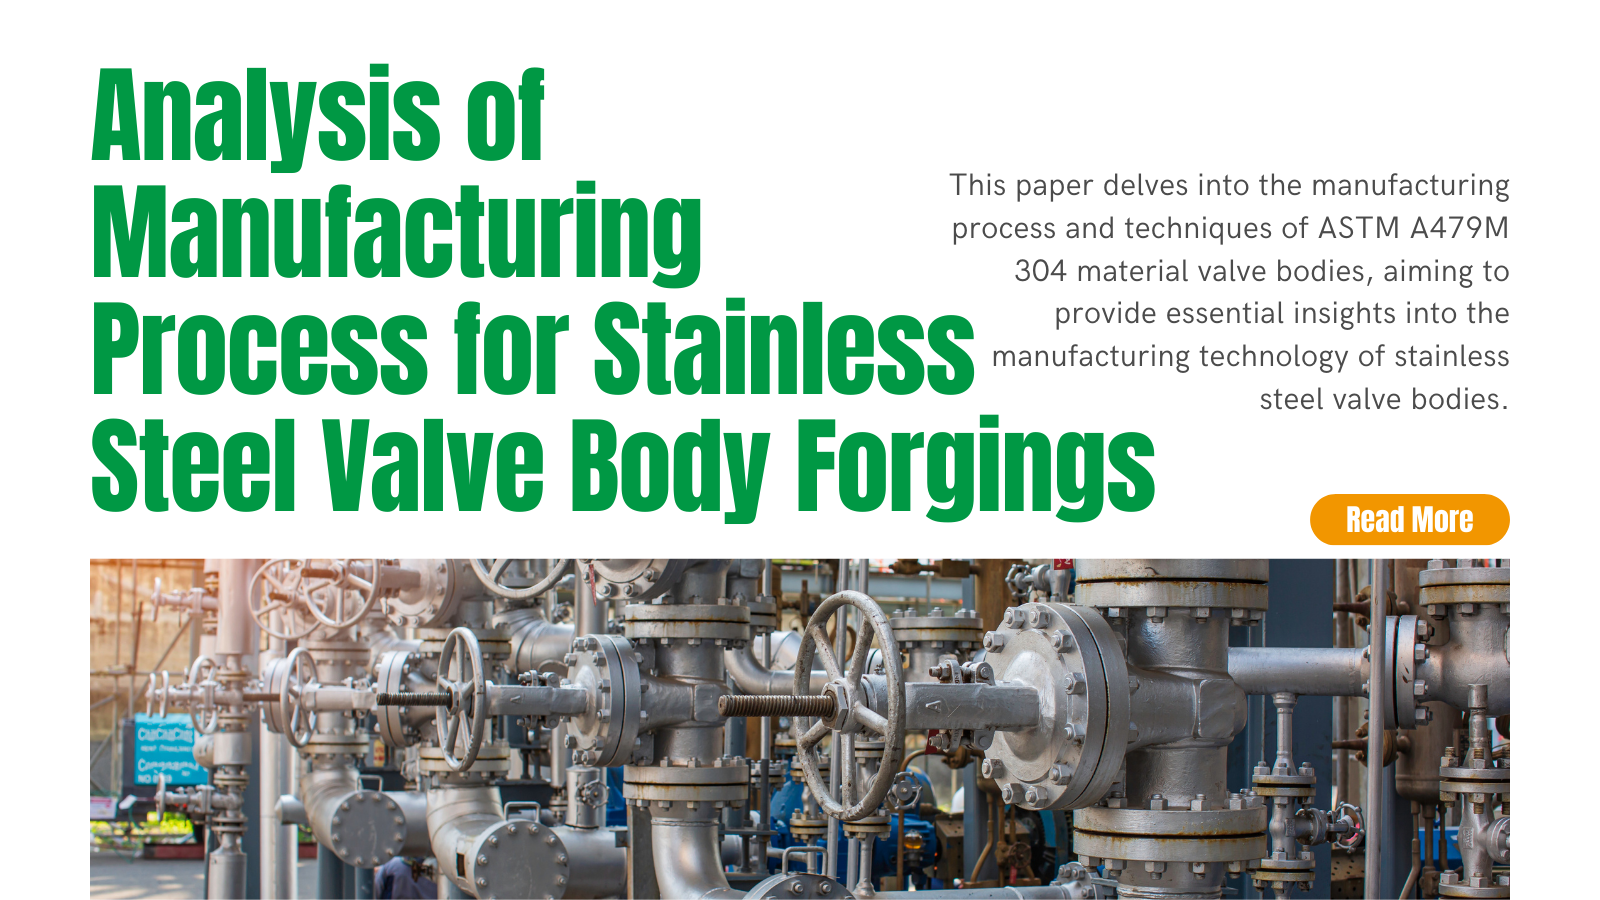 Analysis of Manufacturing Process for Stainless Steel Valve Body Forgings | INOX-TEK